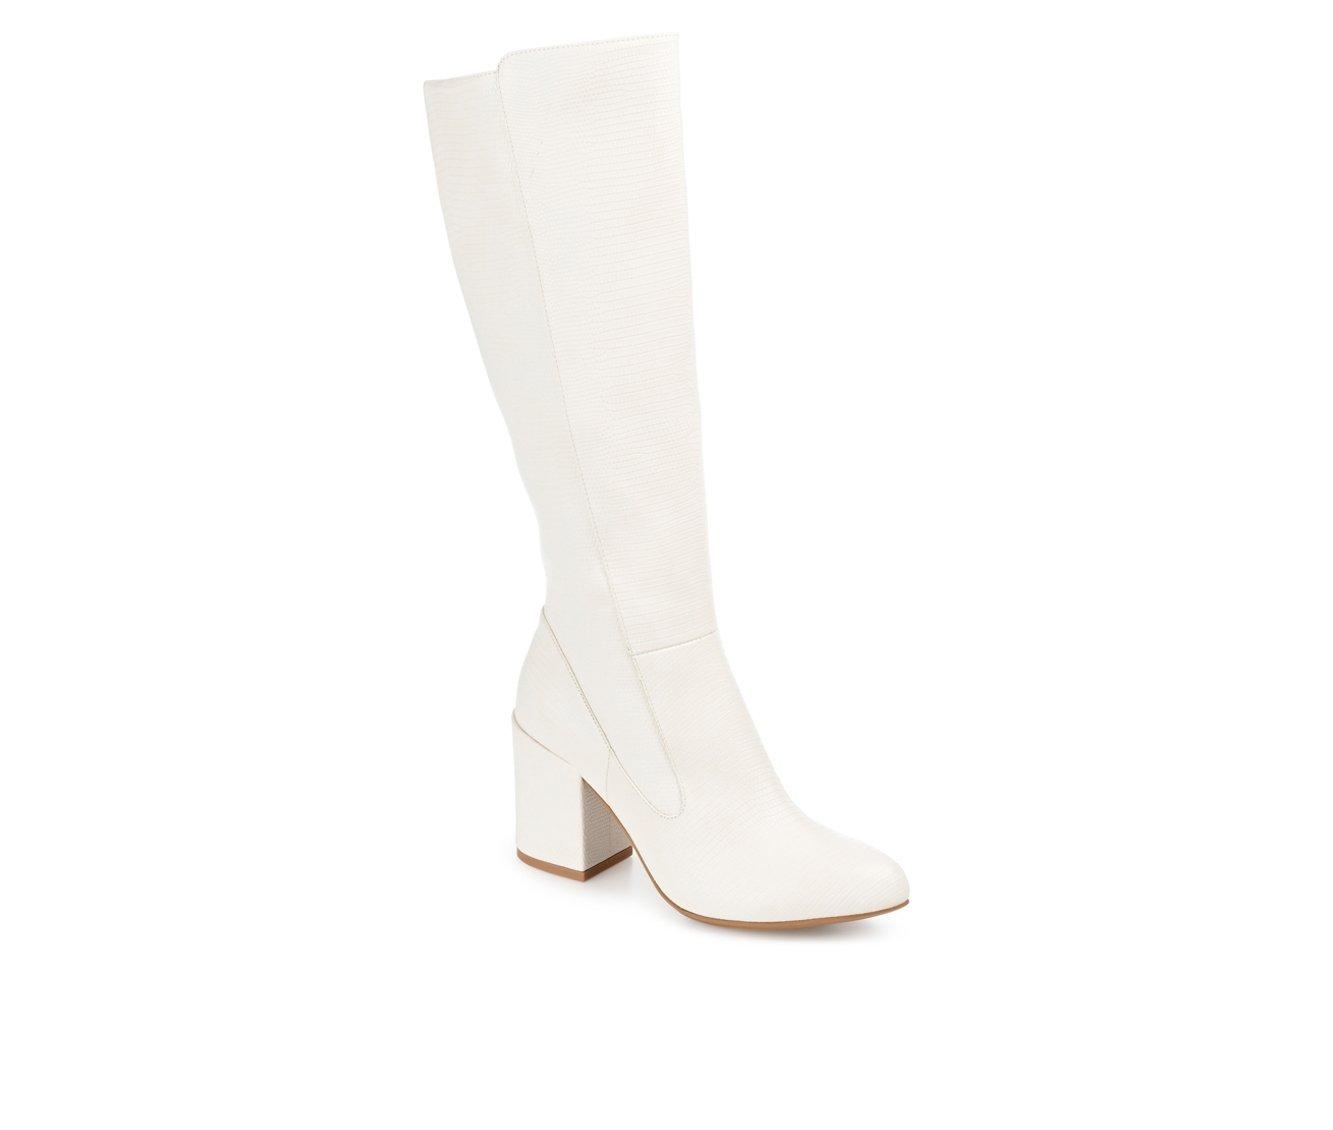 Women's Journee Collection Tavia Knee High Boots | Shoe Carnival